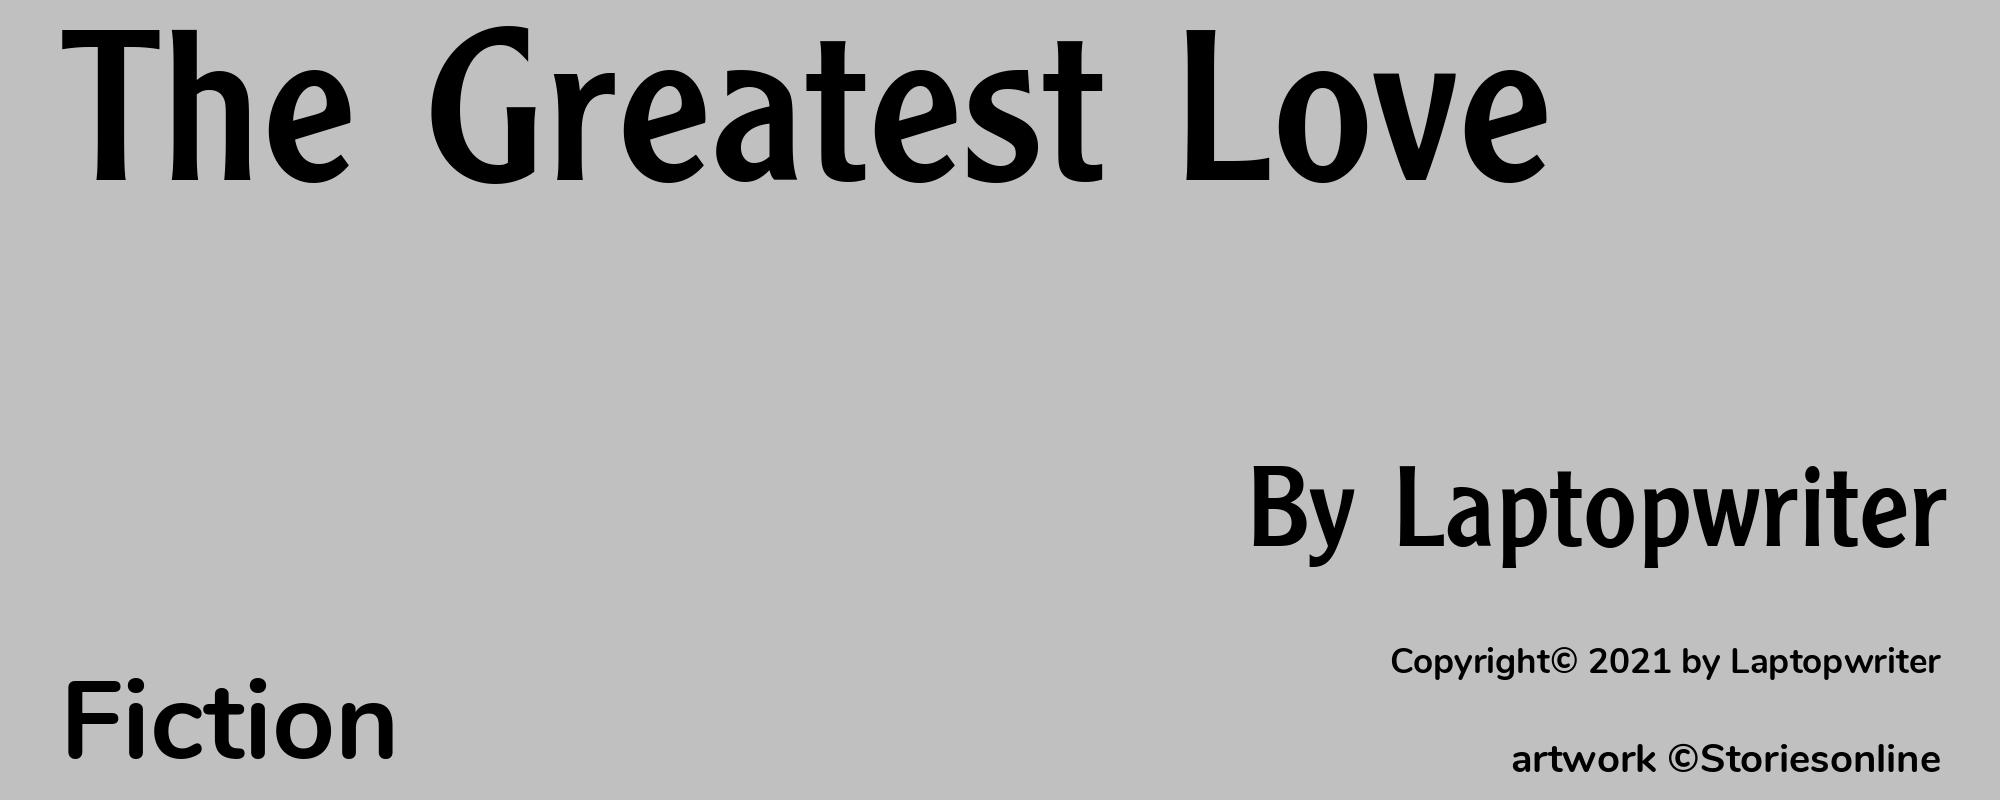 The Greatest Love - Cover